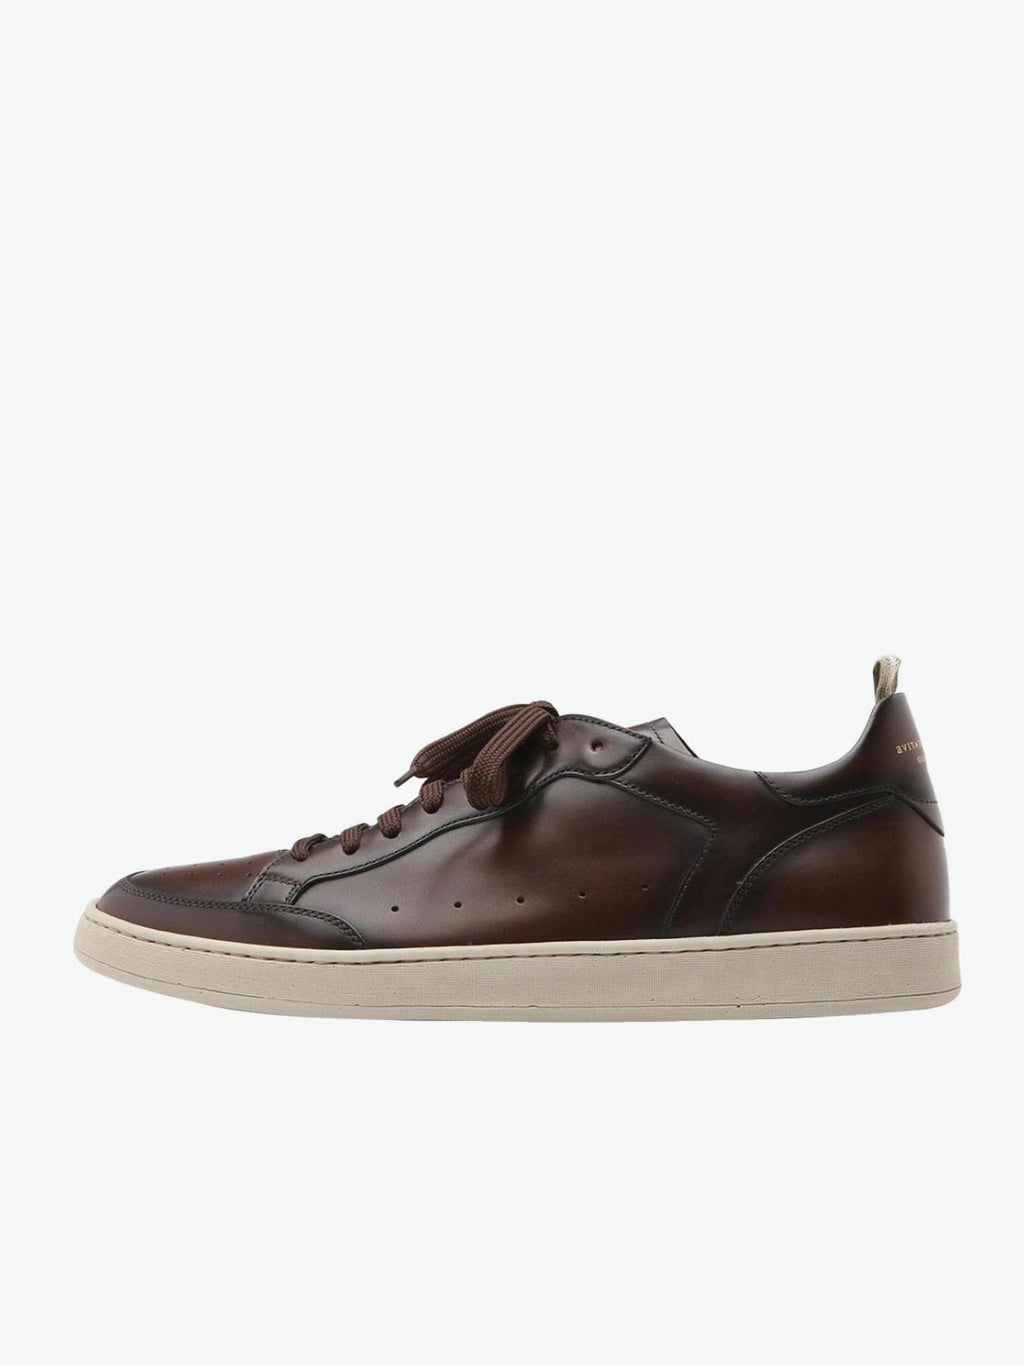 Officine Creative Kareem Lux Dark Brown Leather Sneakers | The Project Garments - A